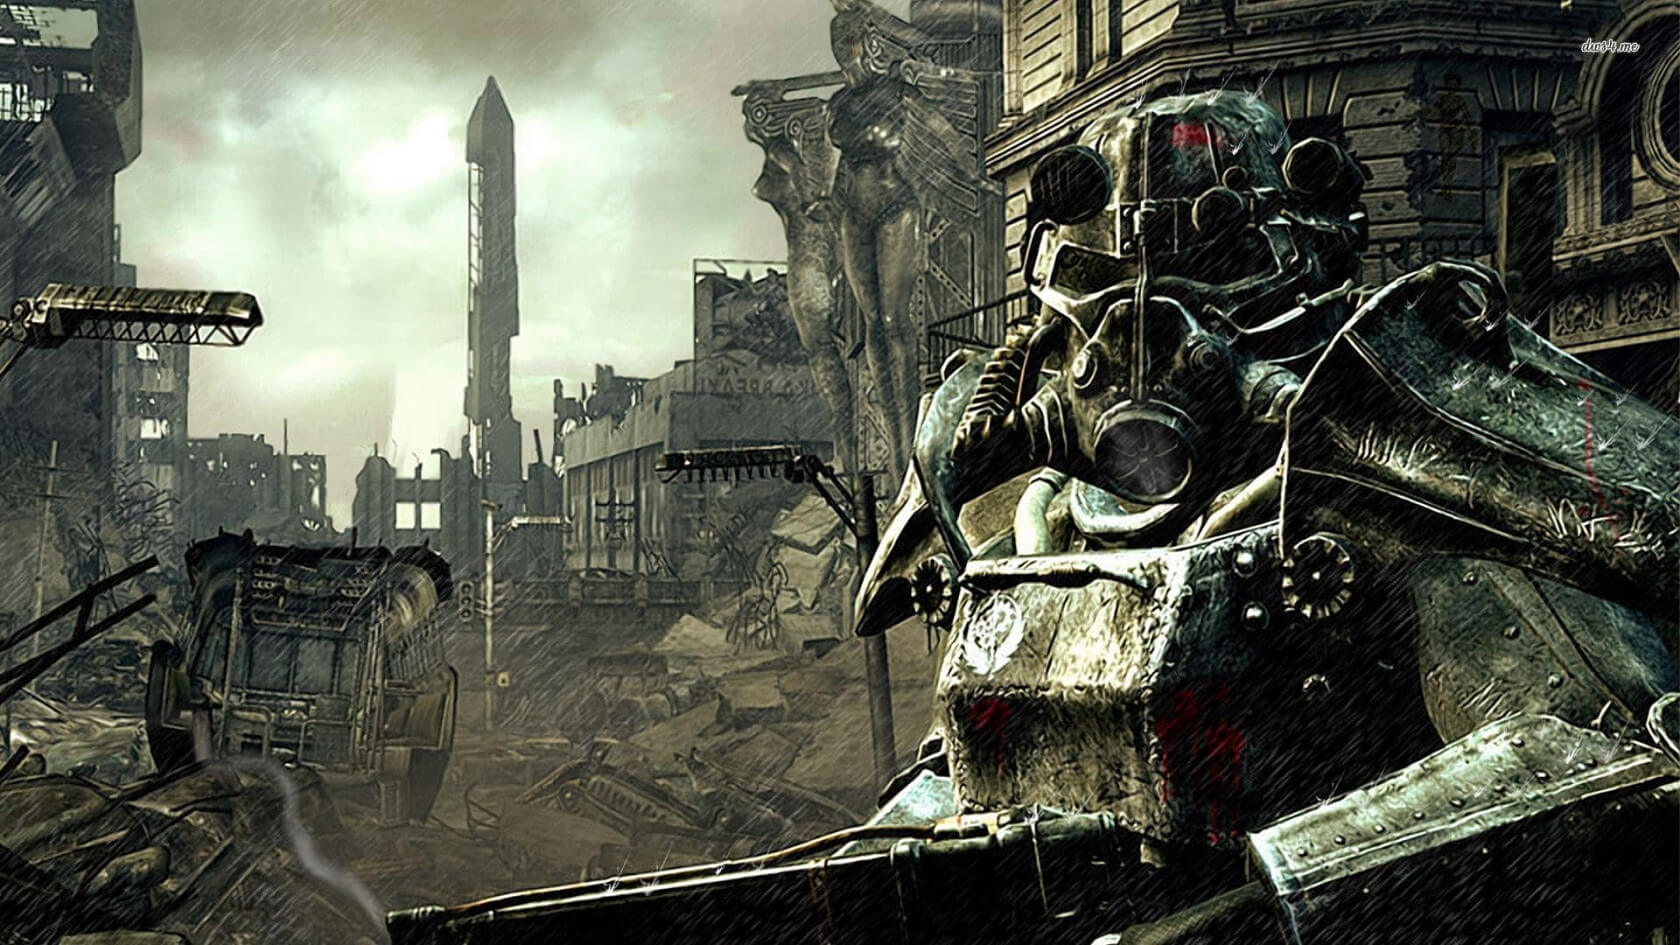 Project that remasters Fallout 3 as a Fallout 4 mod canned over voice acting rights